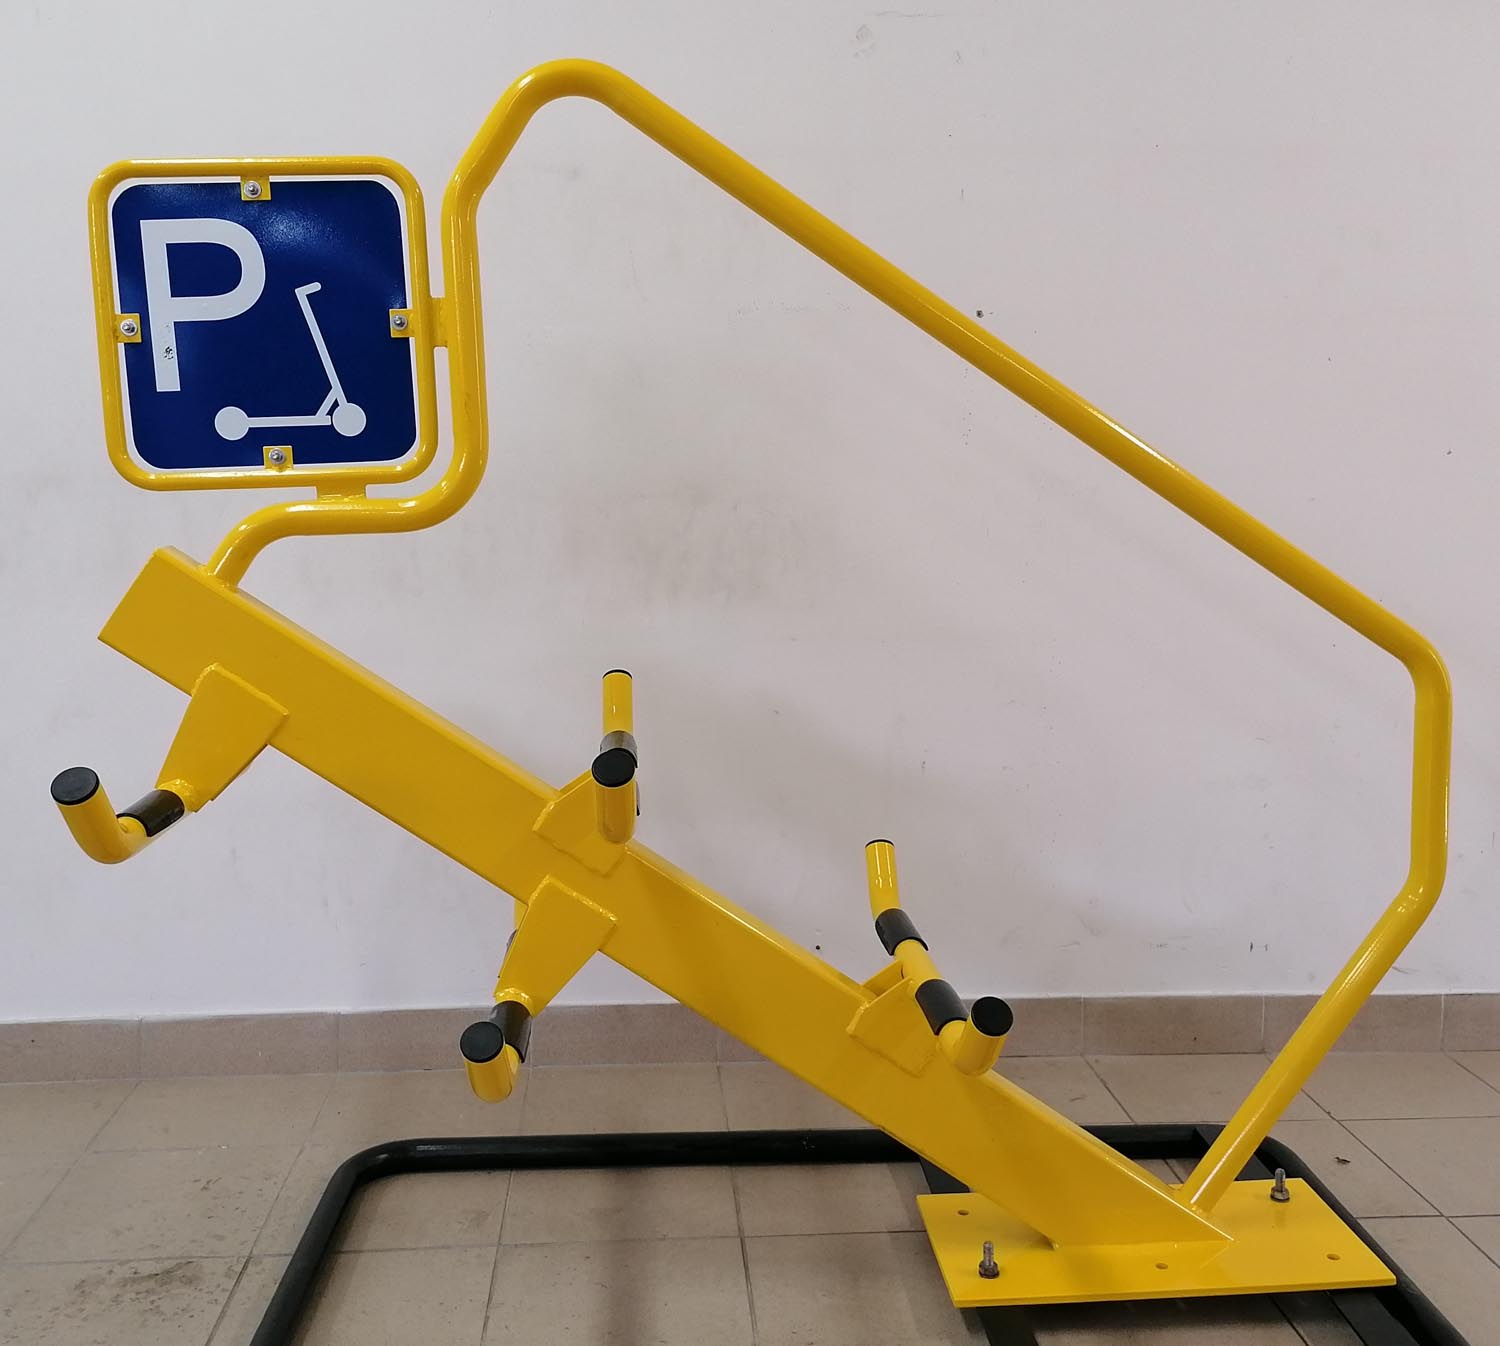 Parking for electric scooters